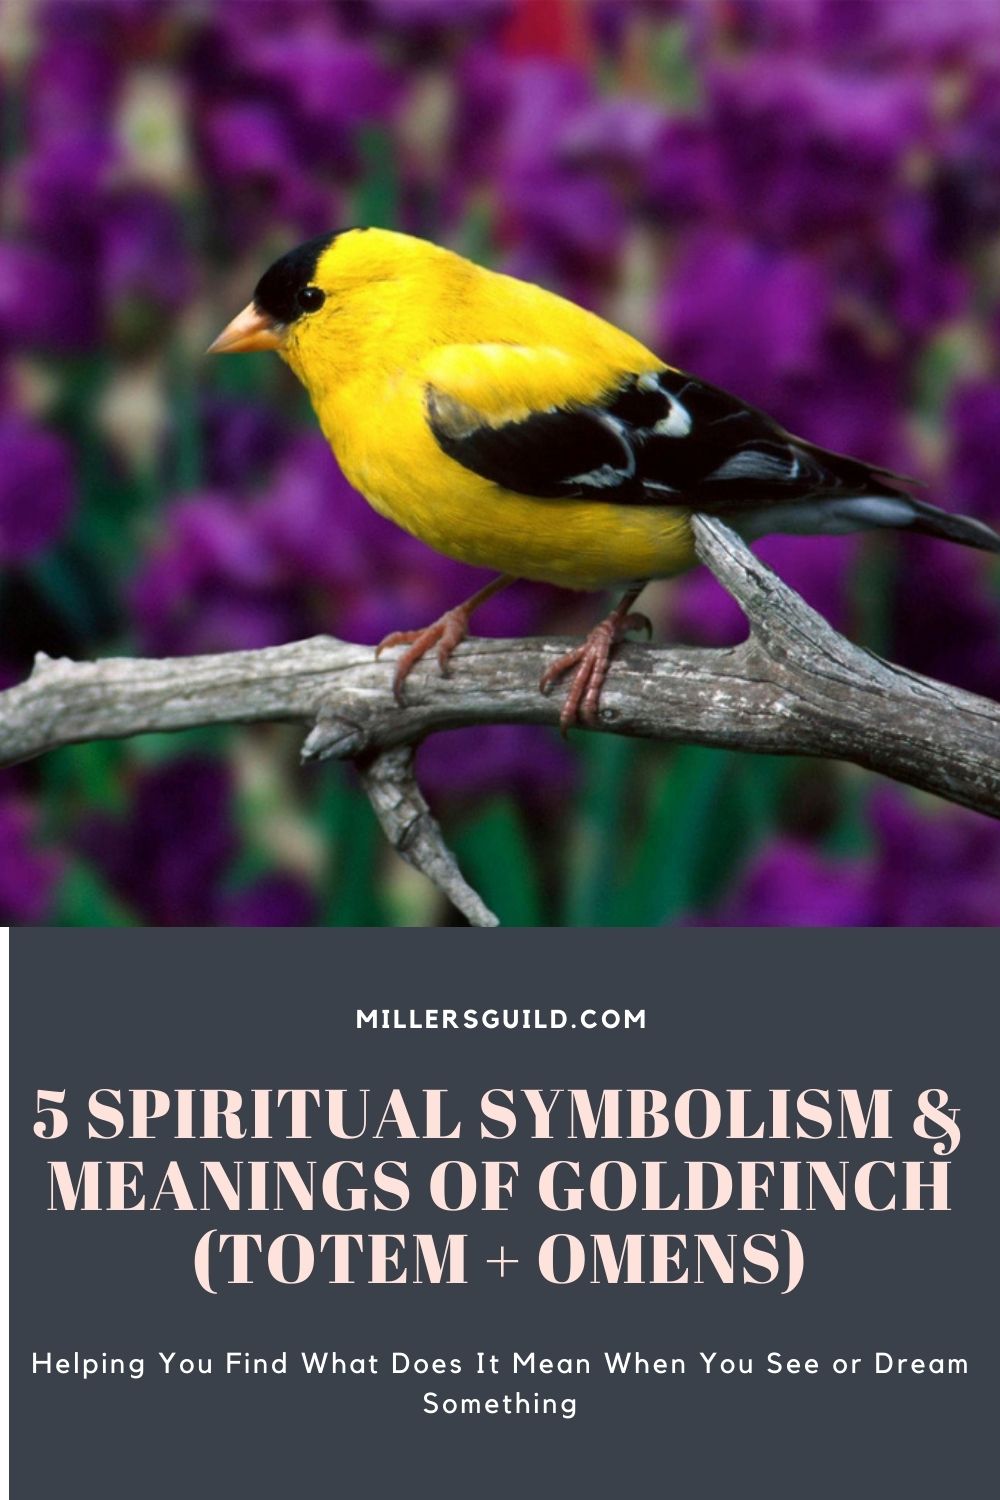 5 Spiritual Symbolism & Meanings of Goldfinch (Totem + Omens) 1